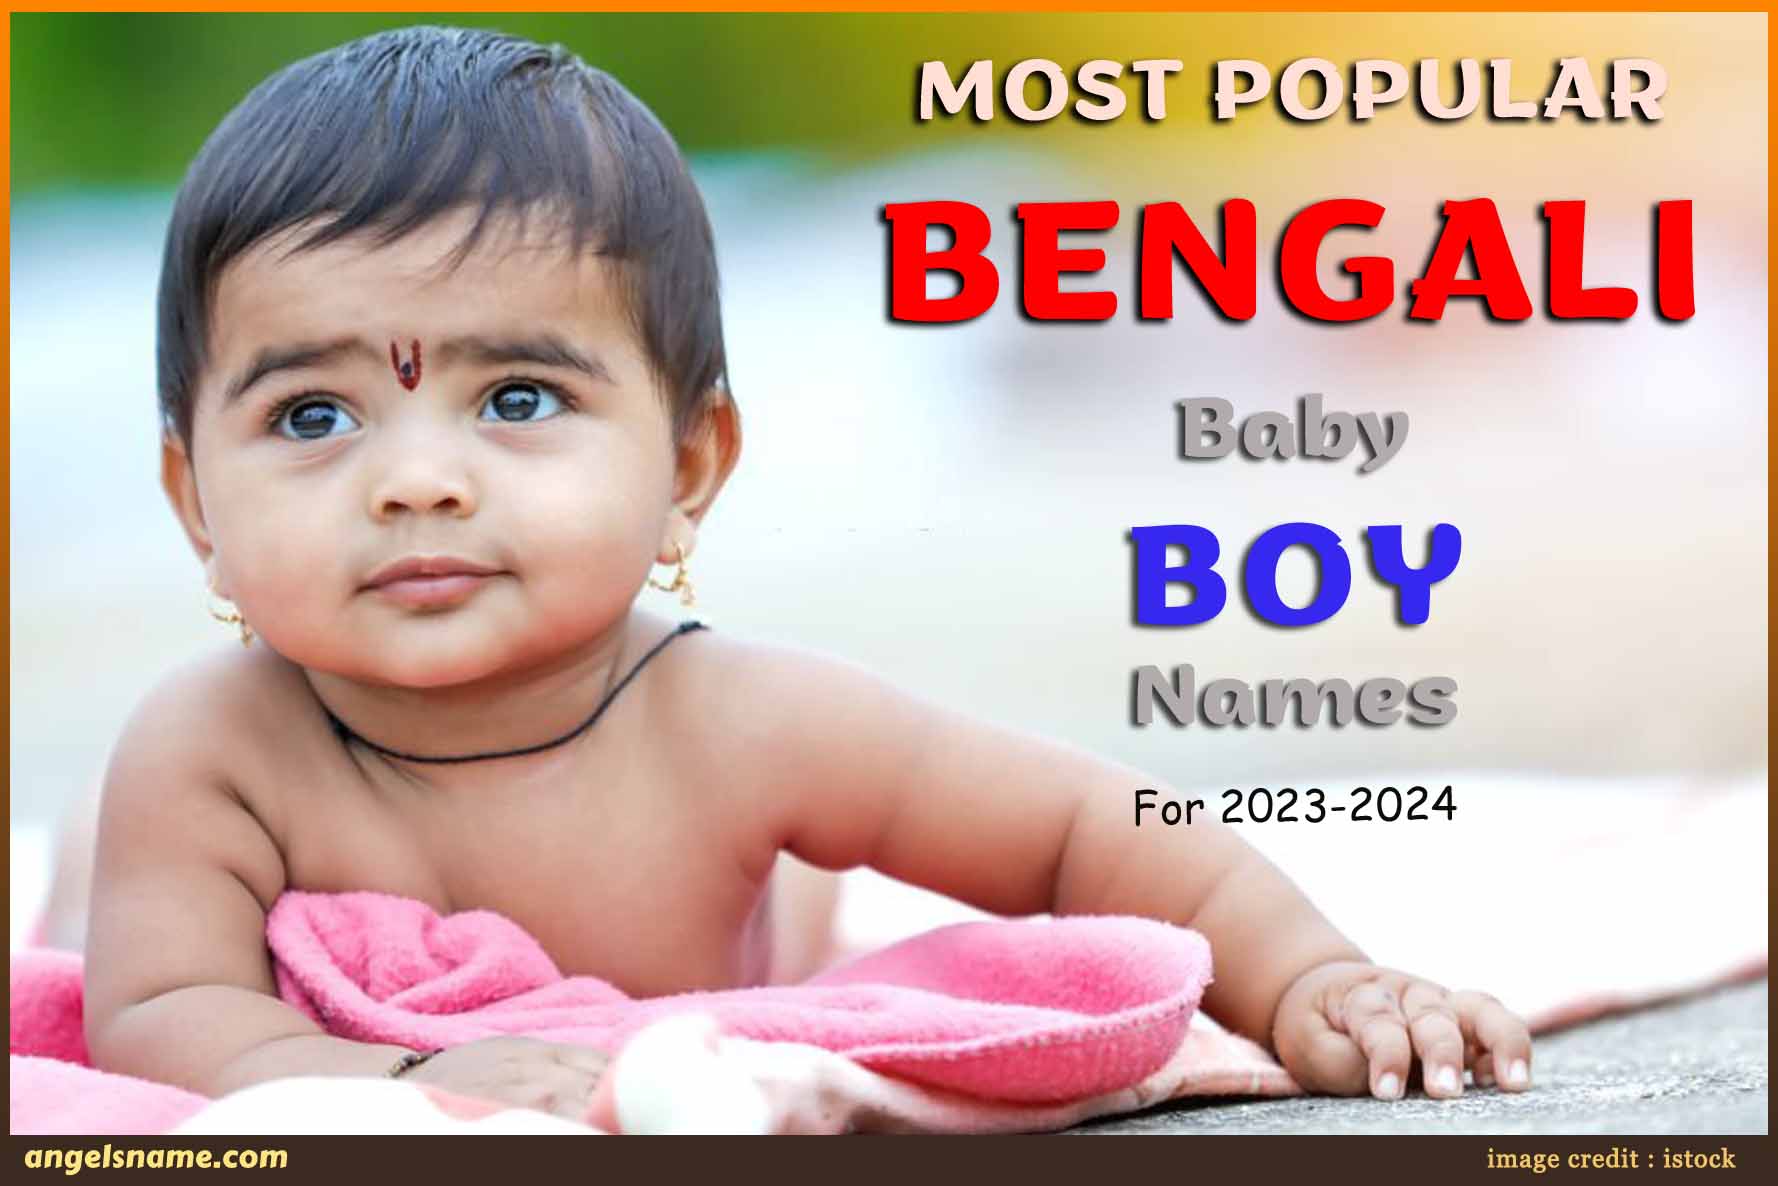 Most Popular Bengali Baby Names for 2023-24